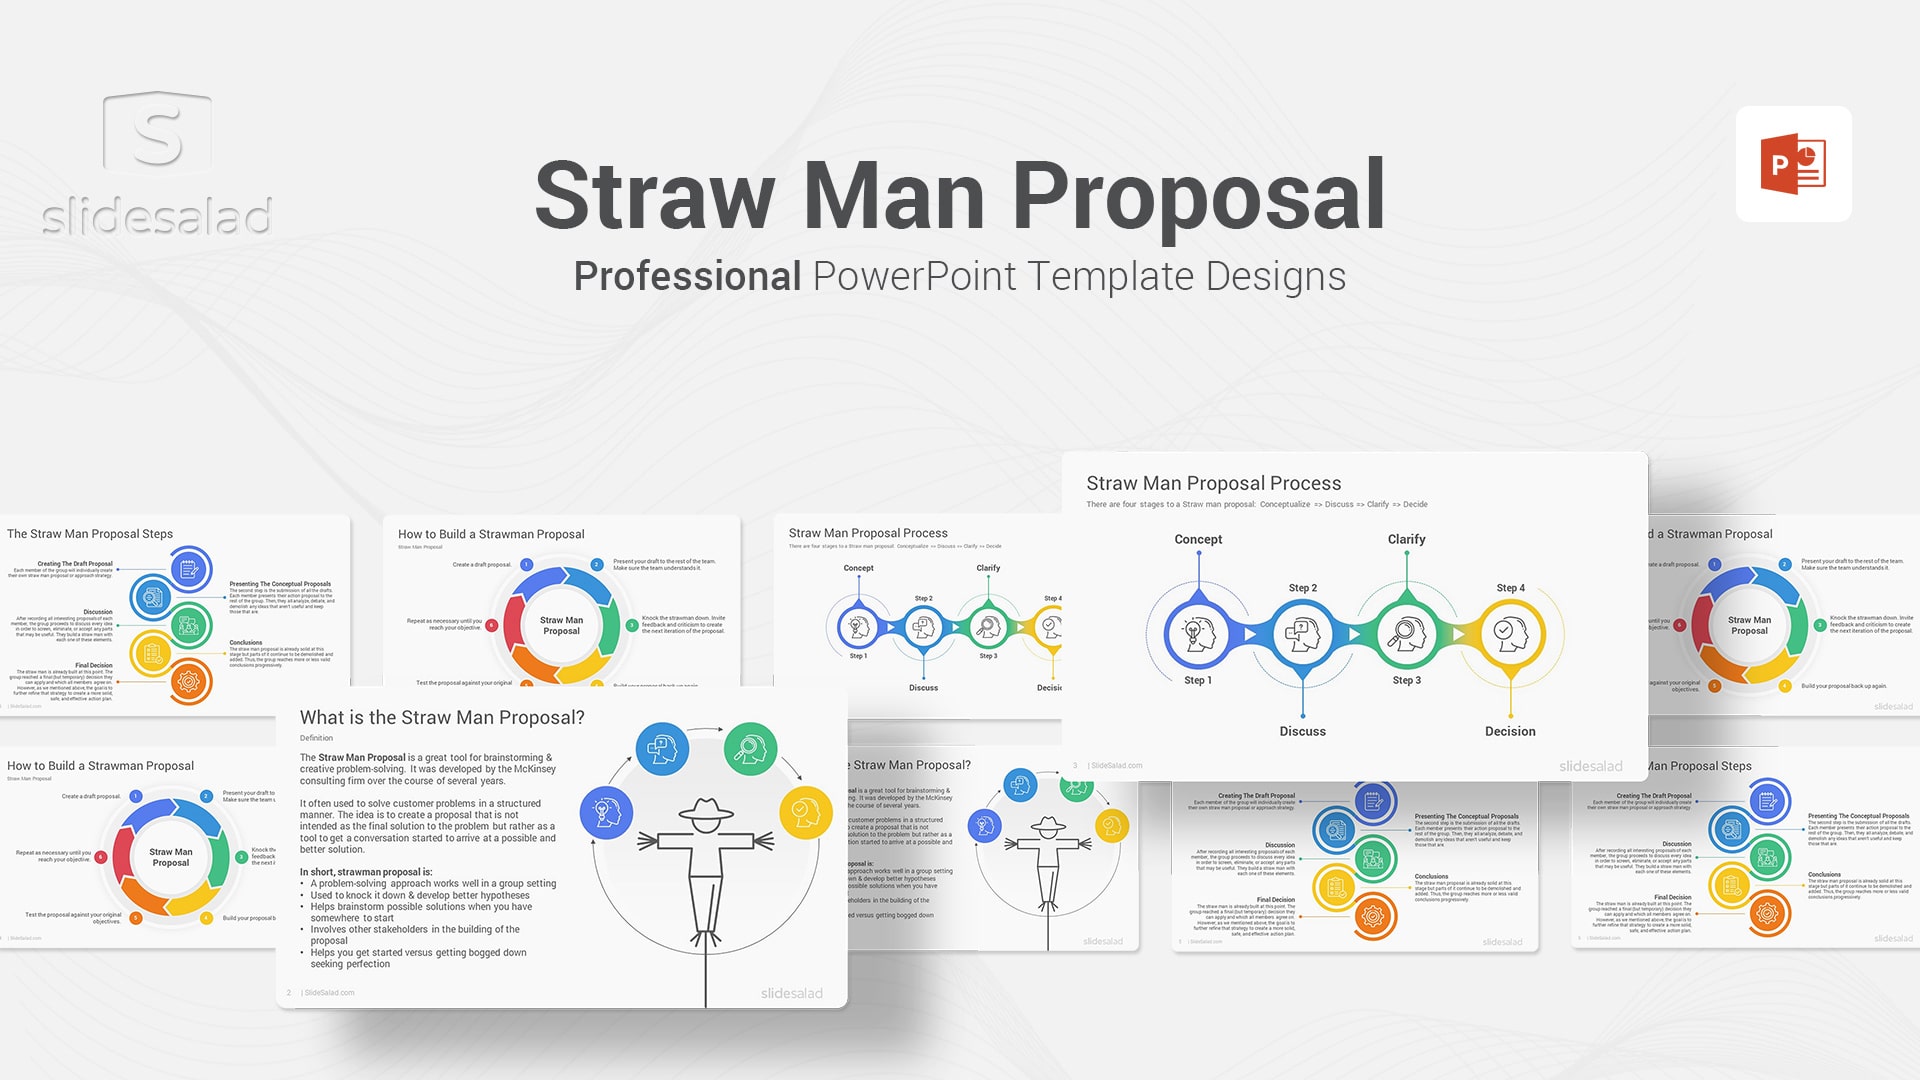 Straw Man Proposal PowerPoint Template Diagrams - Modern PPT Presentation for Showing McKinsey Method for Problem Solving